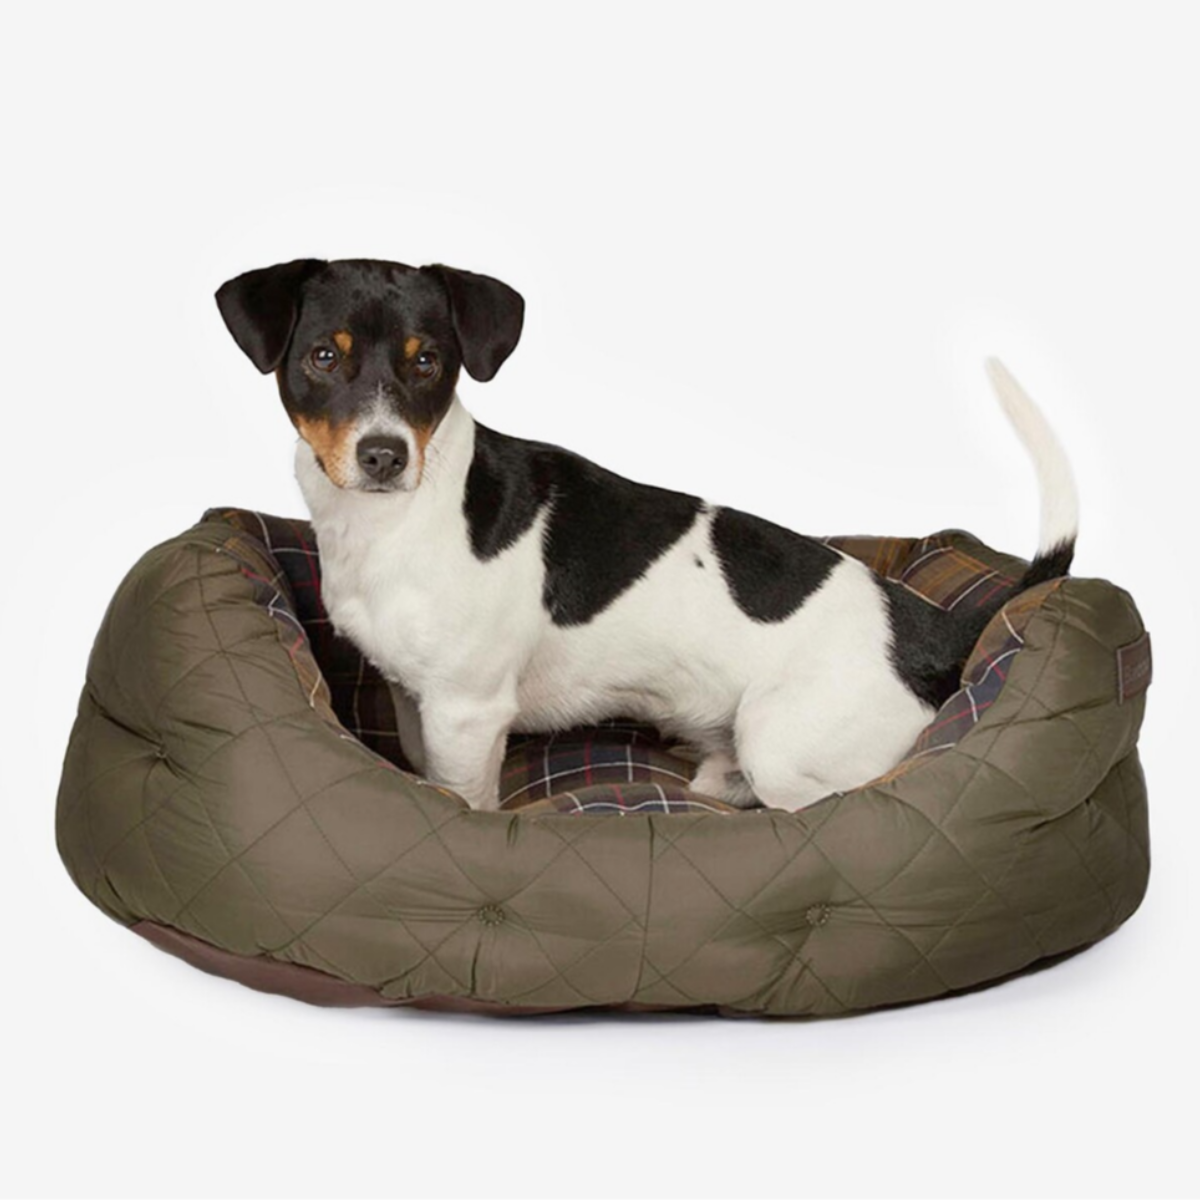 Barbour Quilted Dog Bed 30 Inch  | Olive